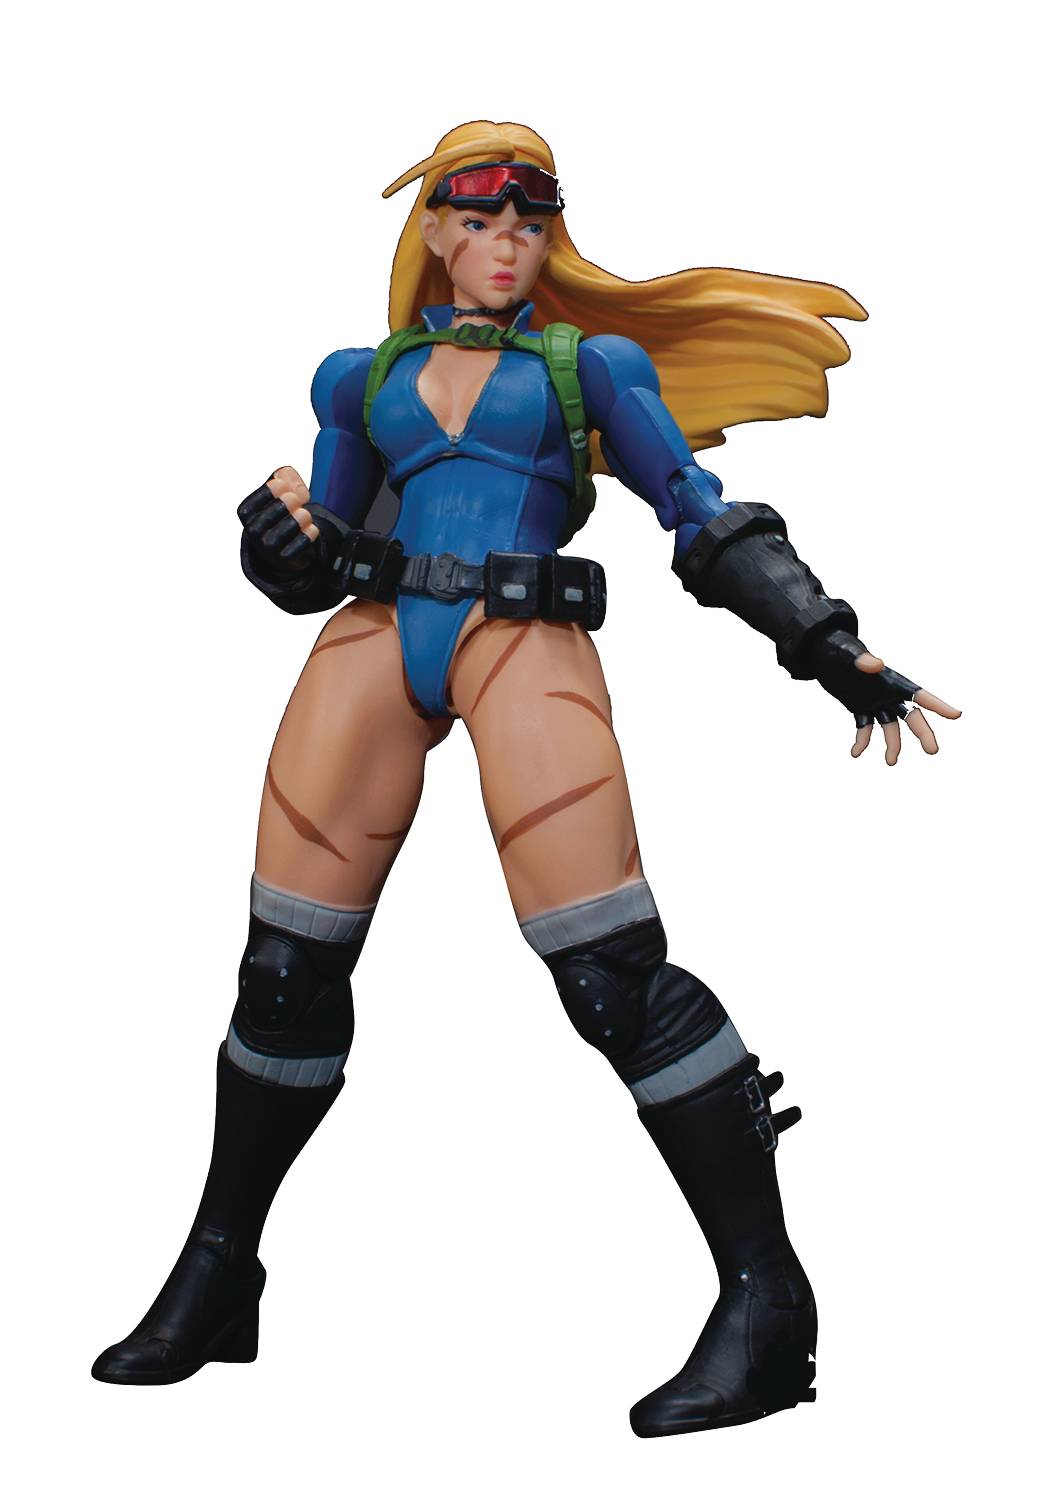 MAY198504 - STORM COLLECTIBLES STREET FIGHTER V CAMMY BATTLE